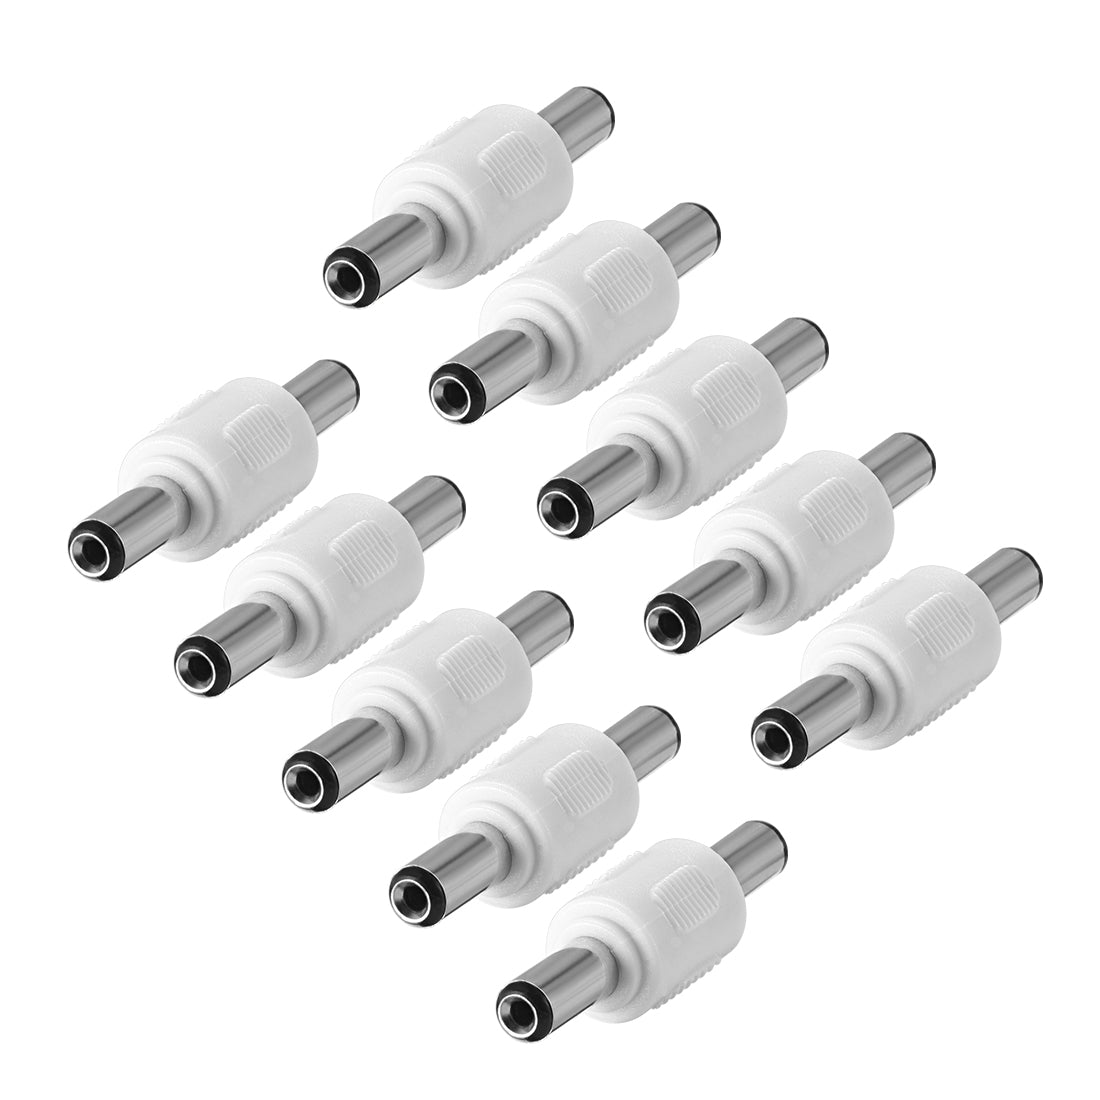 uxcell Uxcell 10Pcs DC Male to Male Connector 5.5mm x 2.1mm Power Cable Jack Adapter White